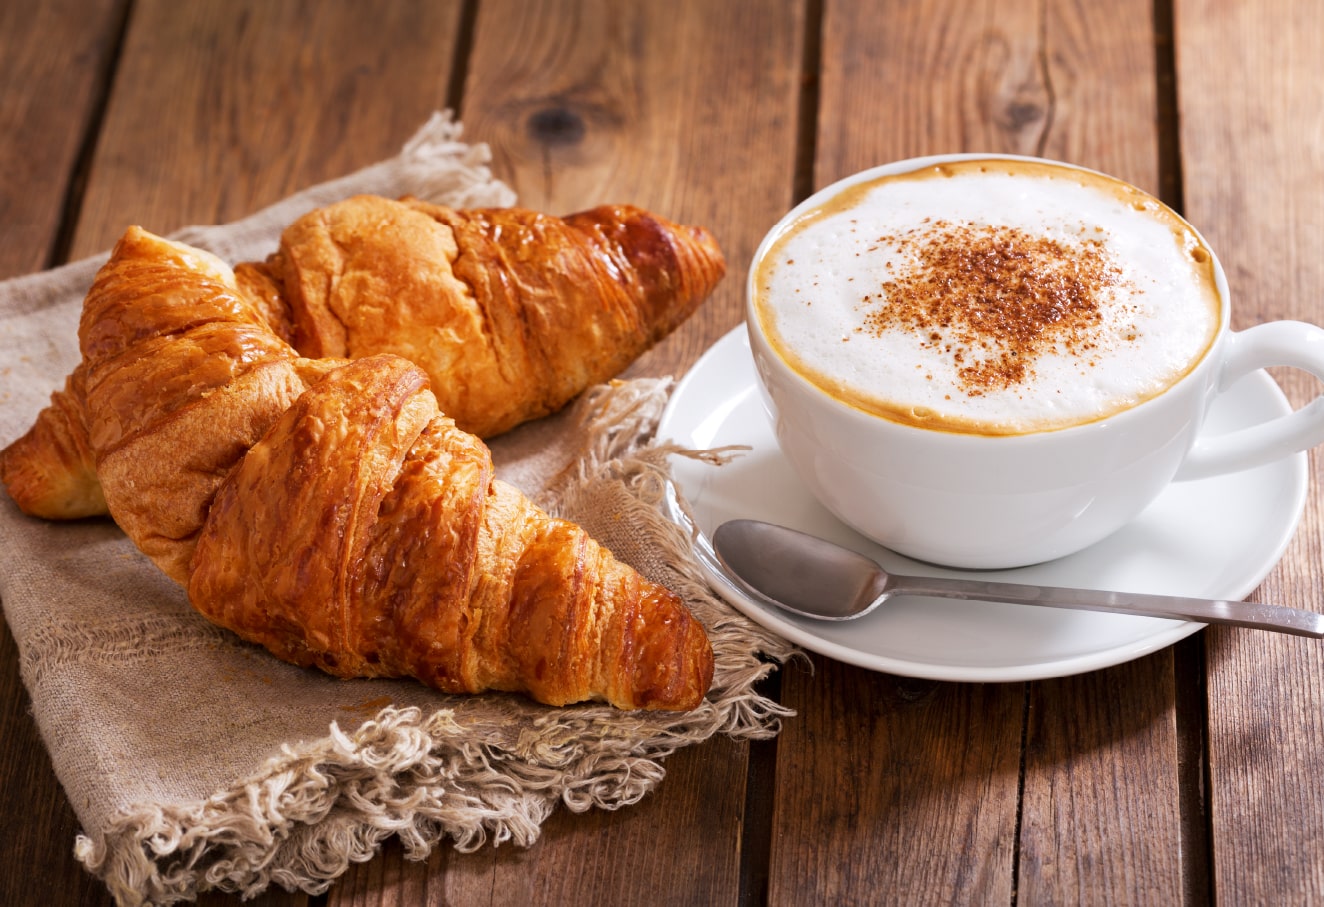 The photo shows two pieces of croissant and a cup of coffee.